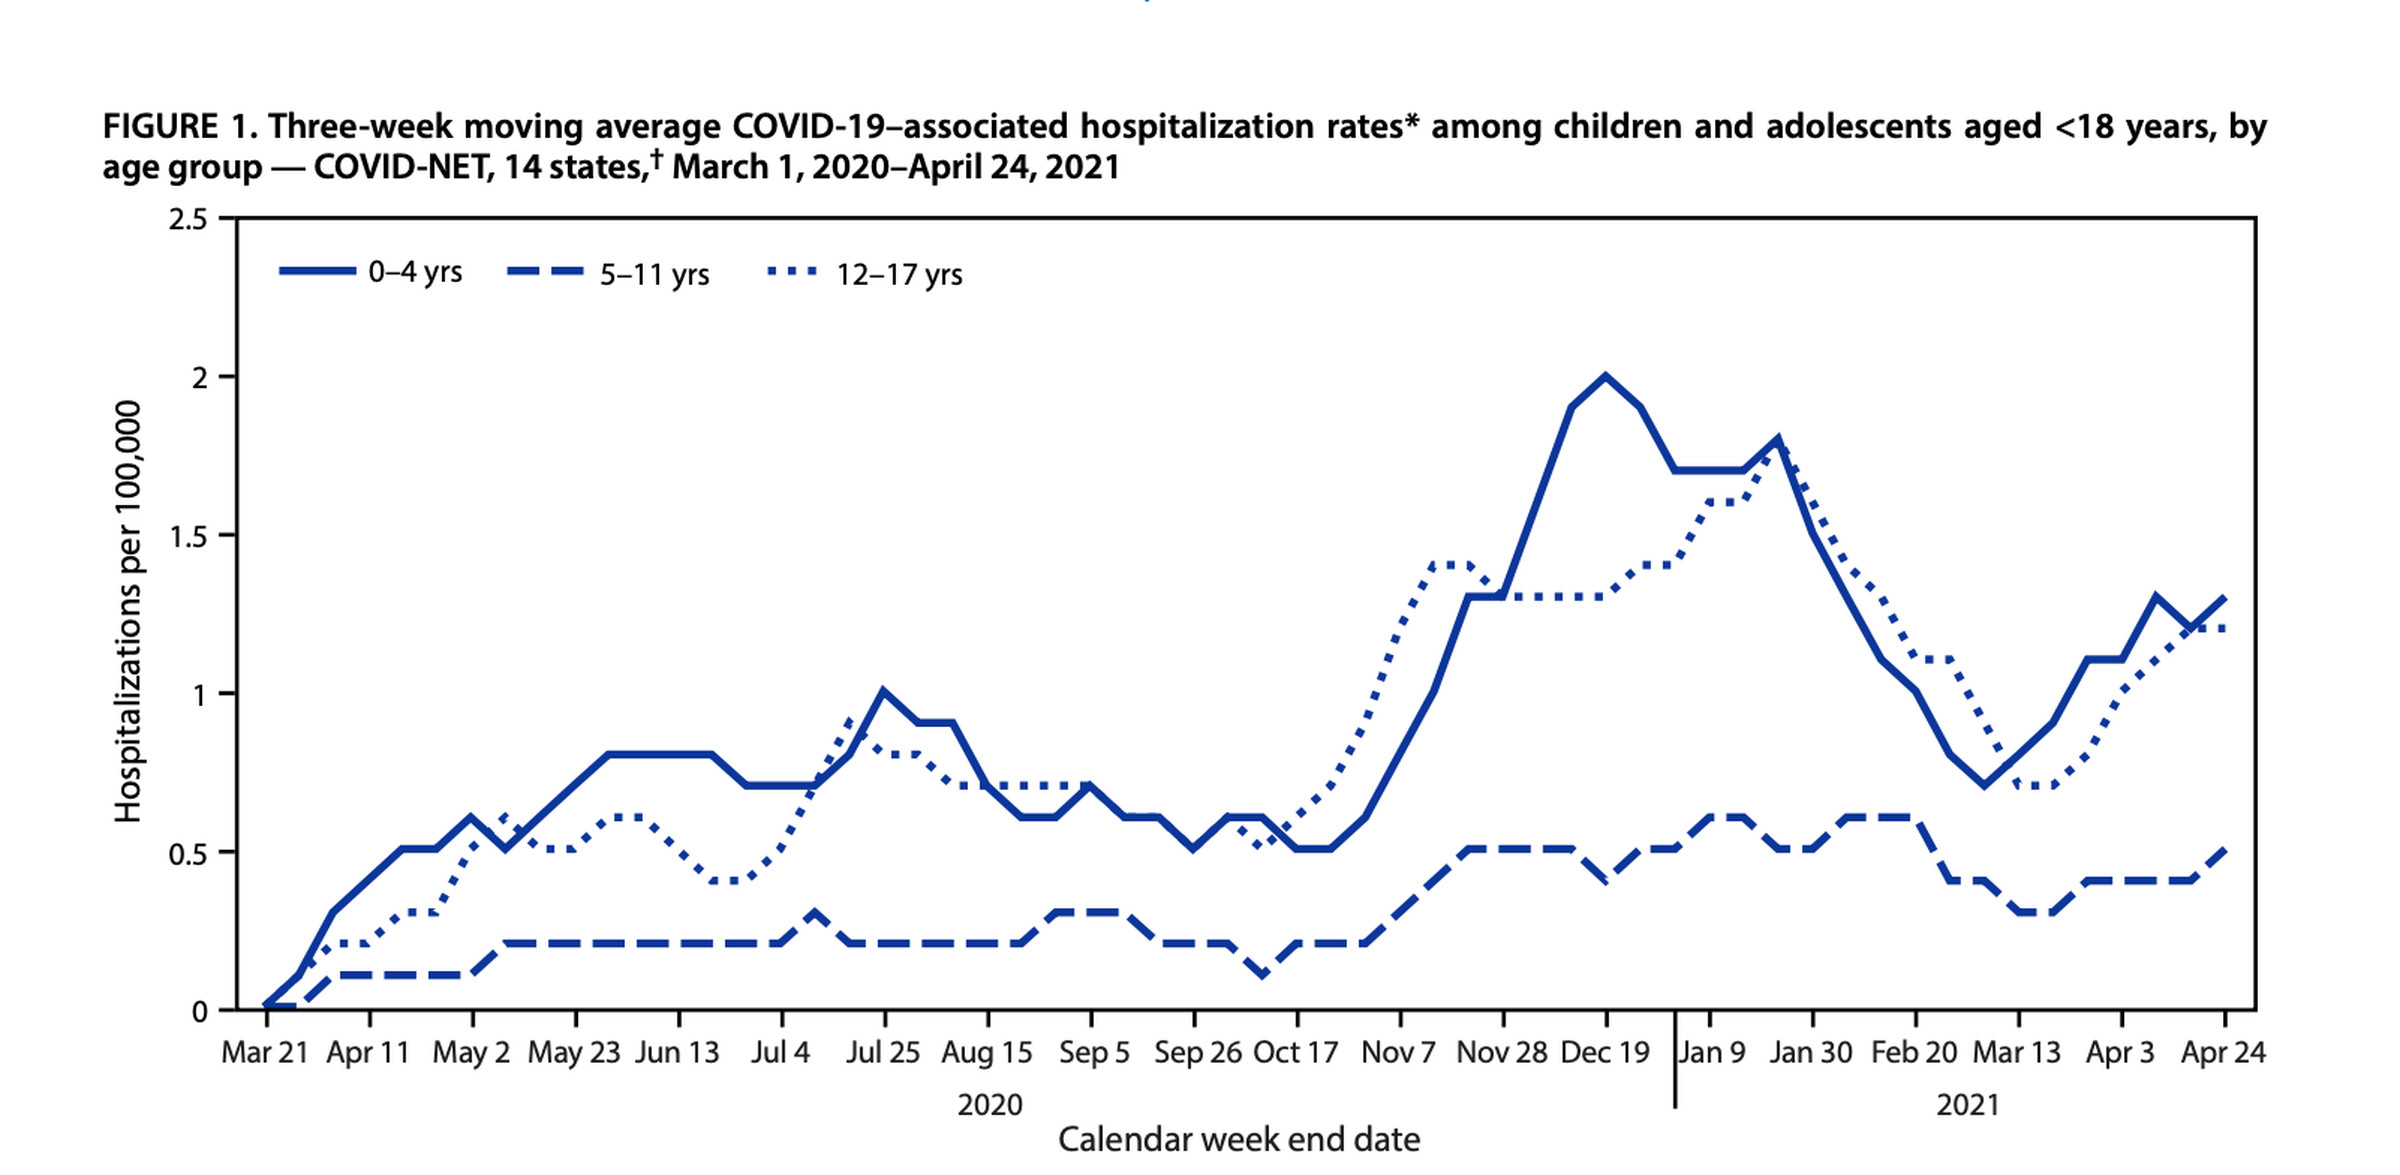 Hospitalization rates for adolescents with COVID-19 peaked in January before declining, but went up again in March.